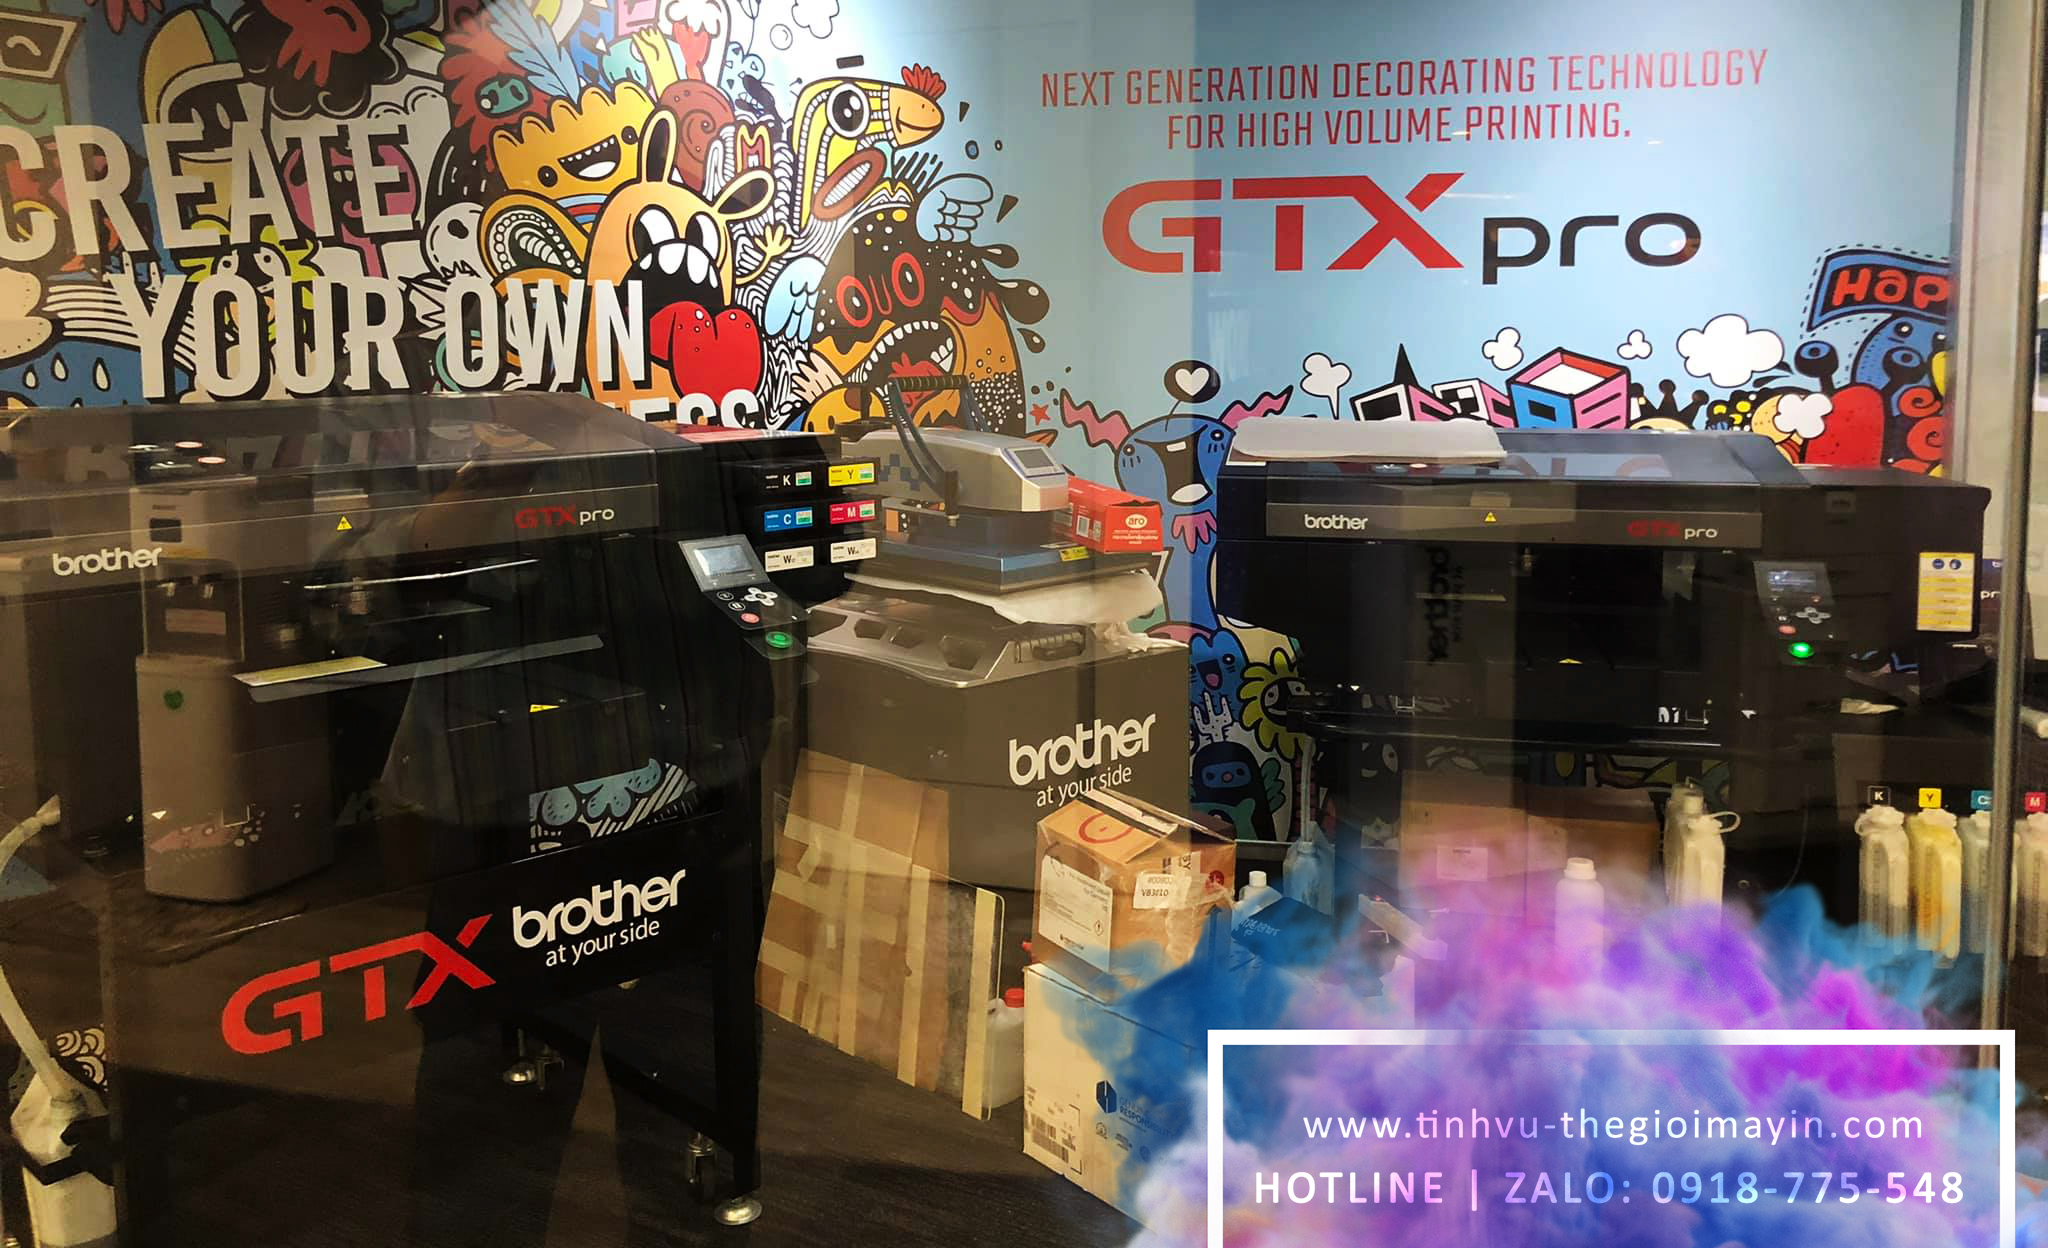 brother gtxpro, brother gtx pro, dtg brother, brother dtg